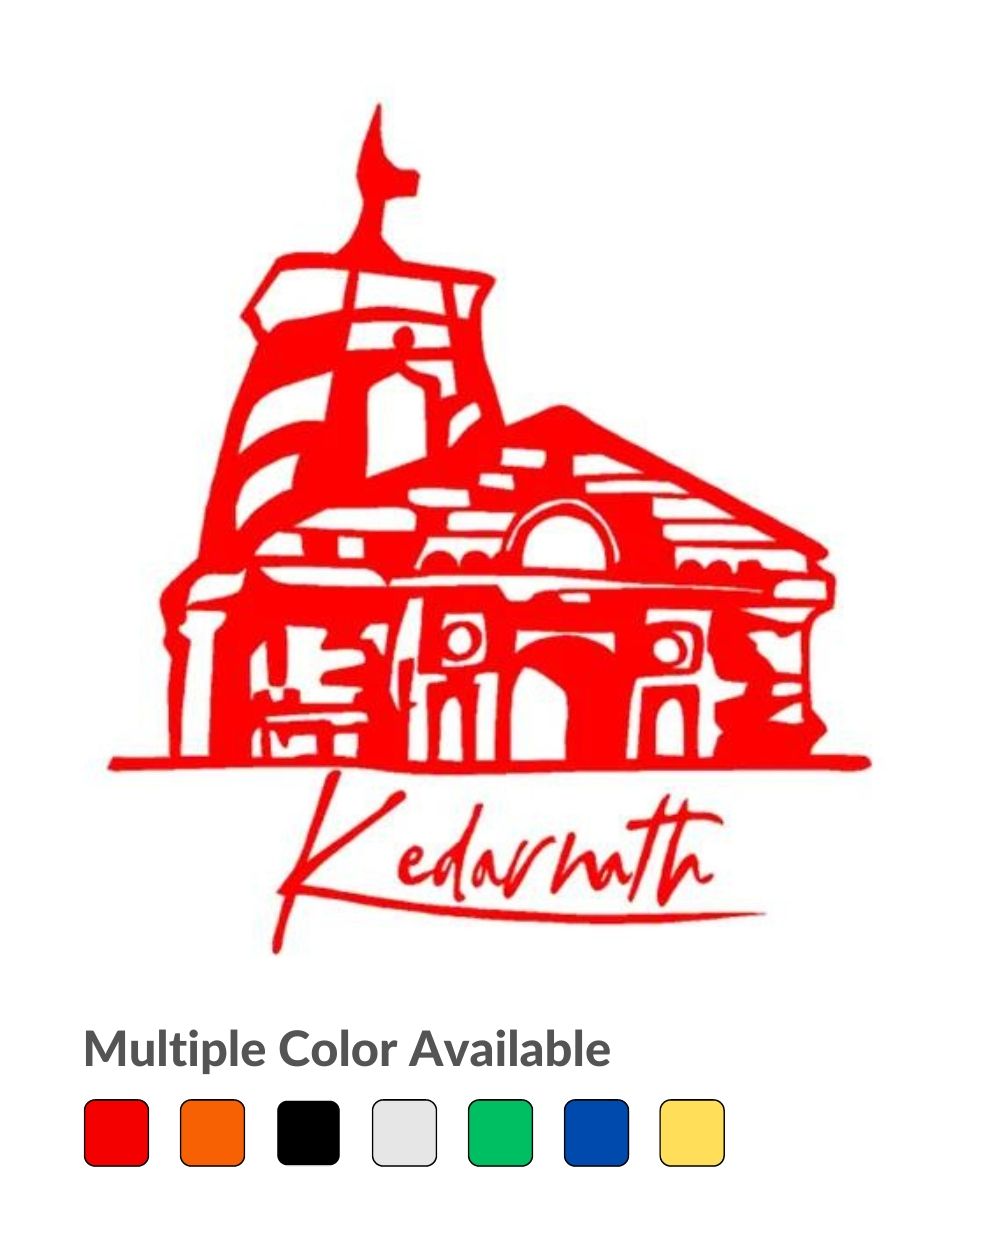 Kedarnath 2 Logo Stickers Pack of 3 : Amazon.in: Office Products